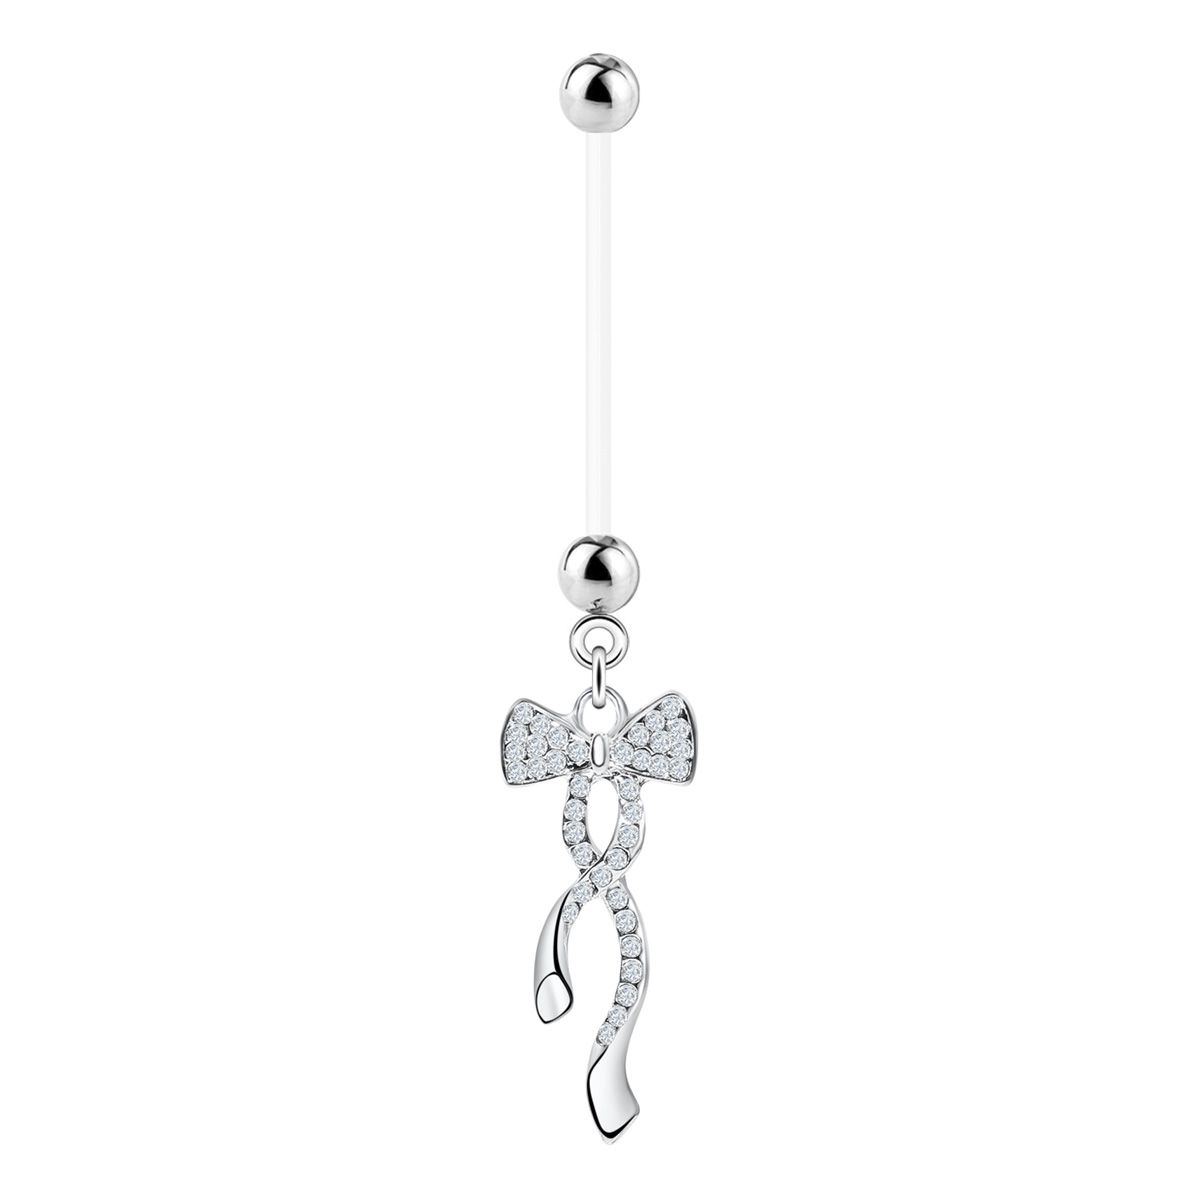 Pregnancy belly button ring with bow dangle